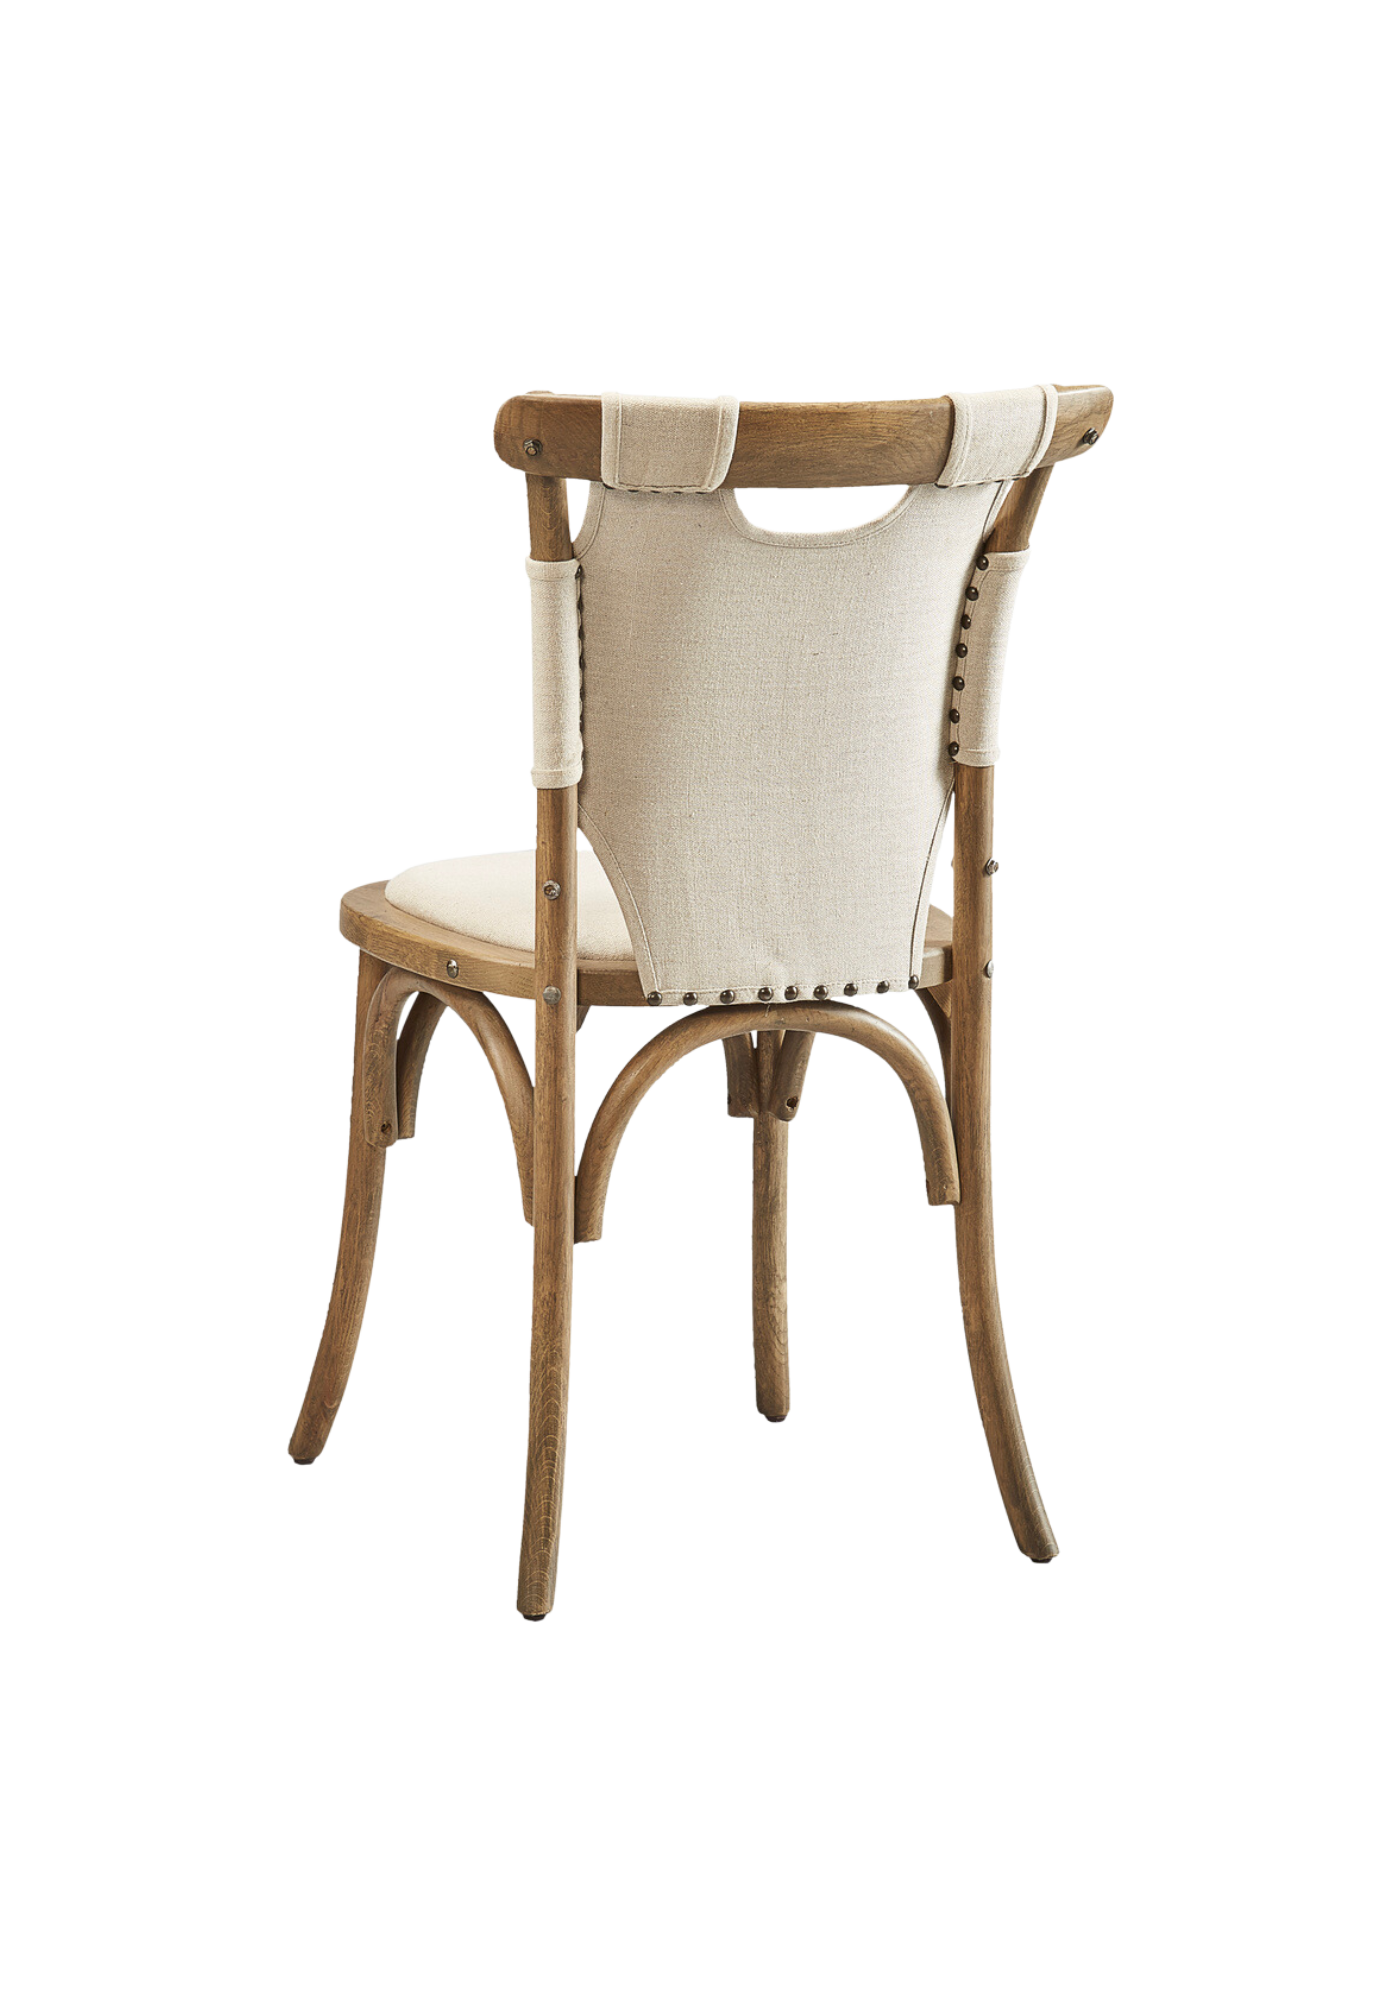 Remy Dining Chair